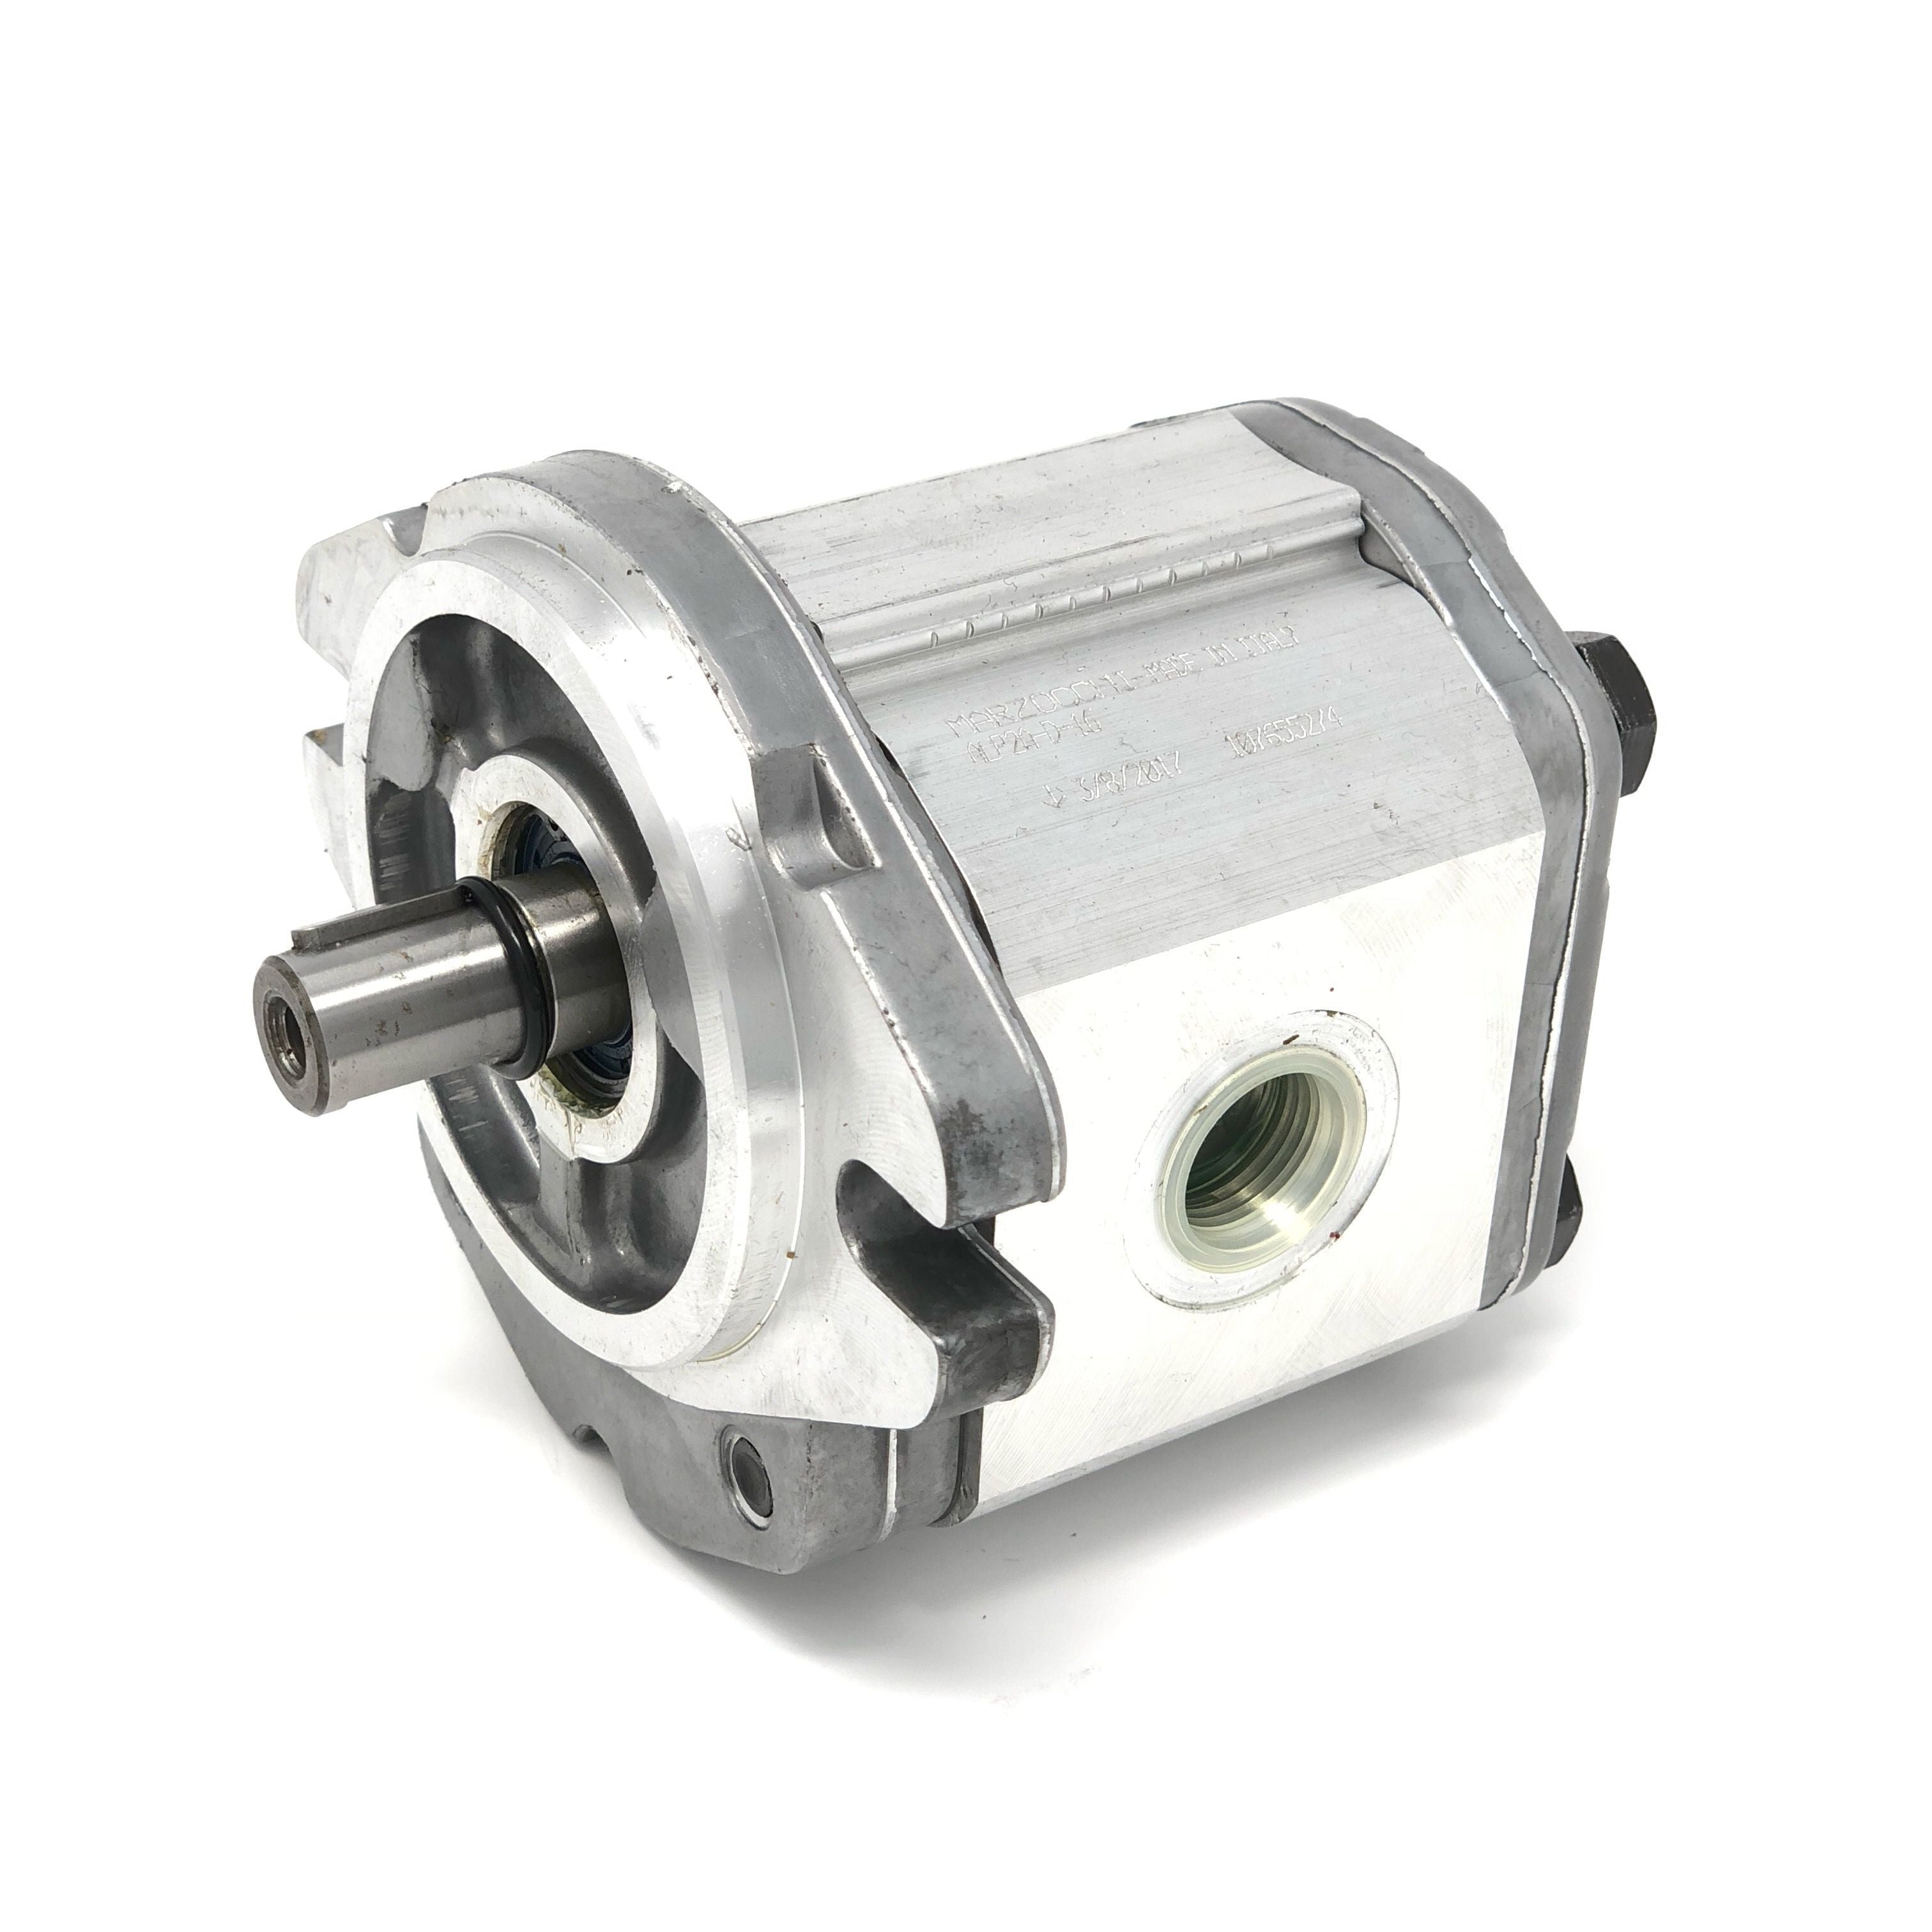 ALP2A-D-30 : Marzocchi Gear Pump, CW, 21.1cc (1.2871in3), 10.03 GPM, 2610psi, 2200 RPM, #12 SAE (3/4") In, #10 SAE (5/8") Out, Keyed Shaft 5/8" Bore x 5/32" Key, SAE A 2-Bolt Mount